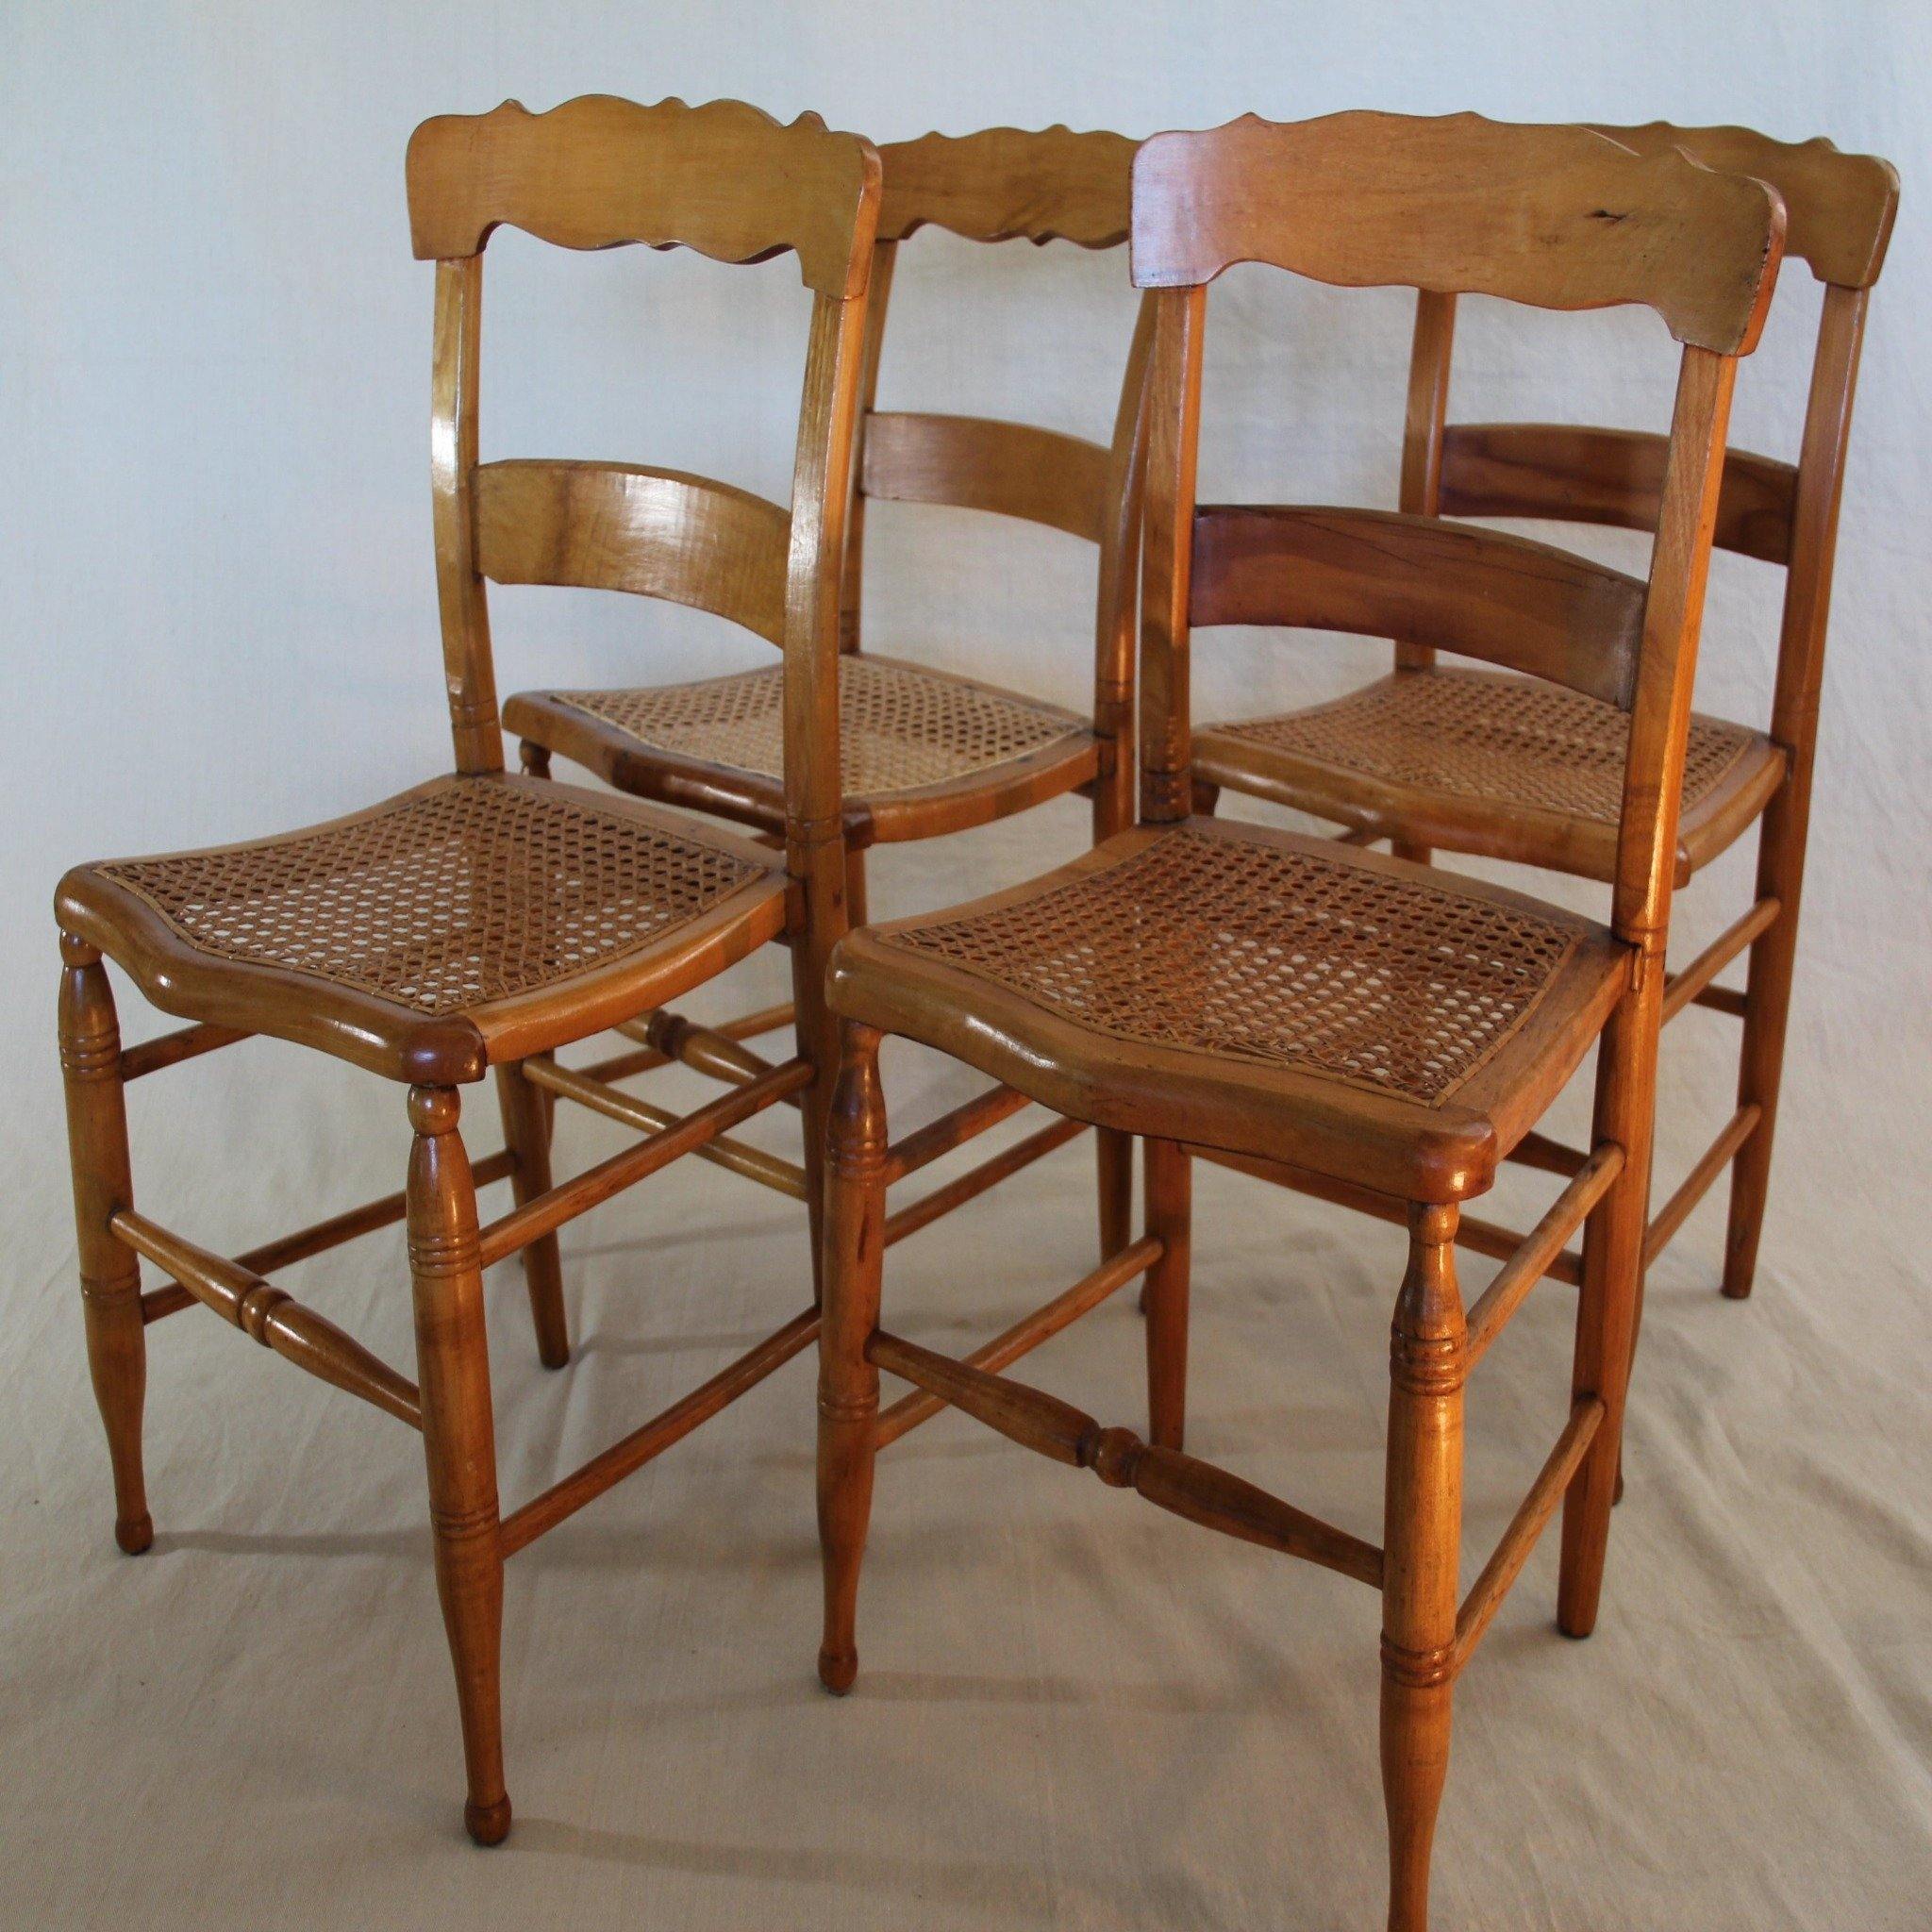 Side View Pine Chairs with Cane seats-Cook Street Vintage